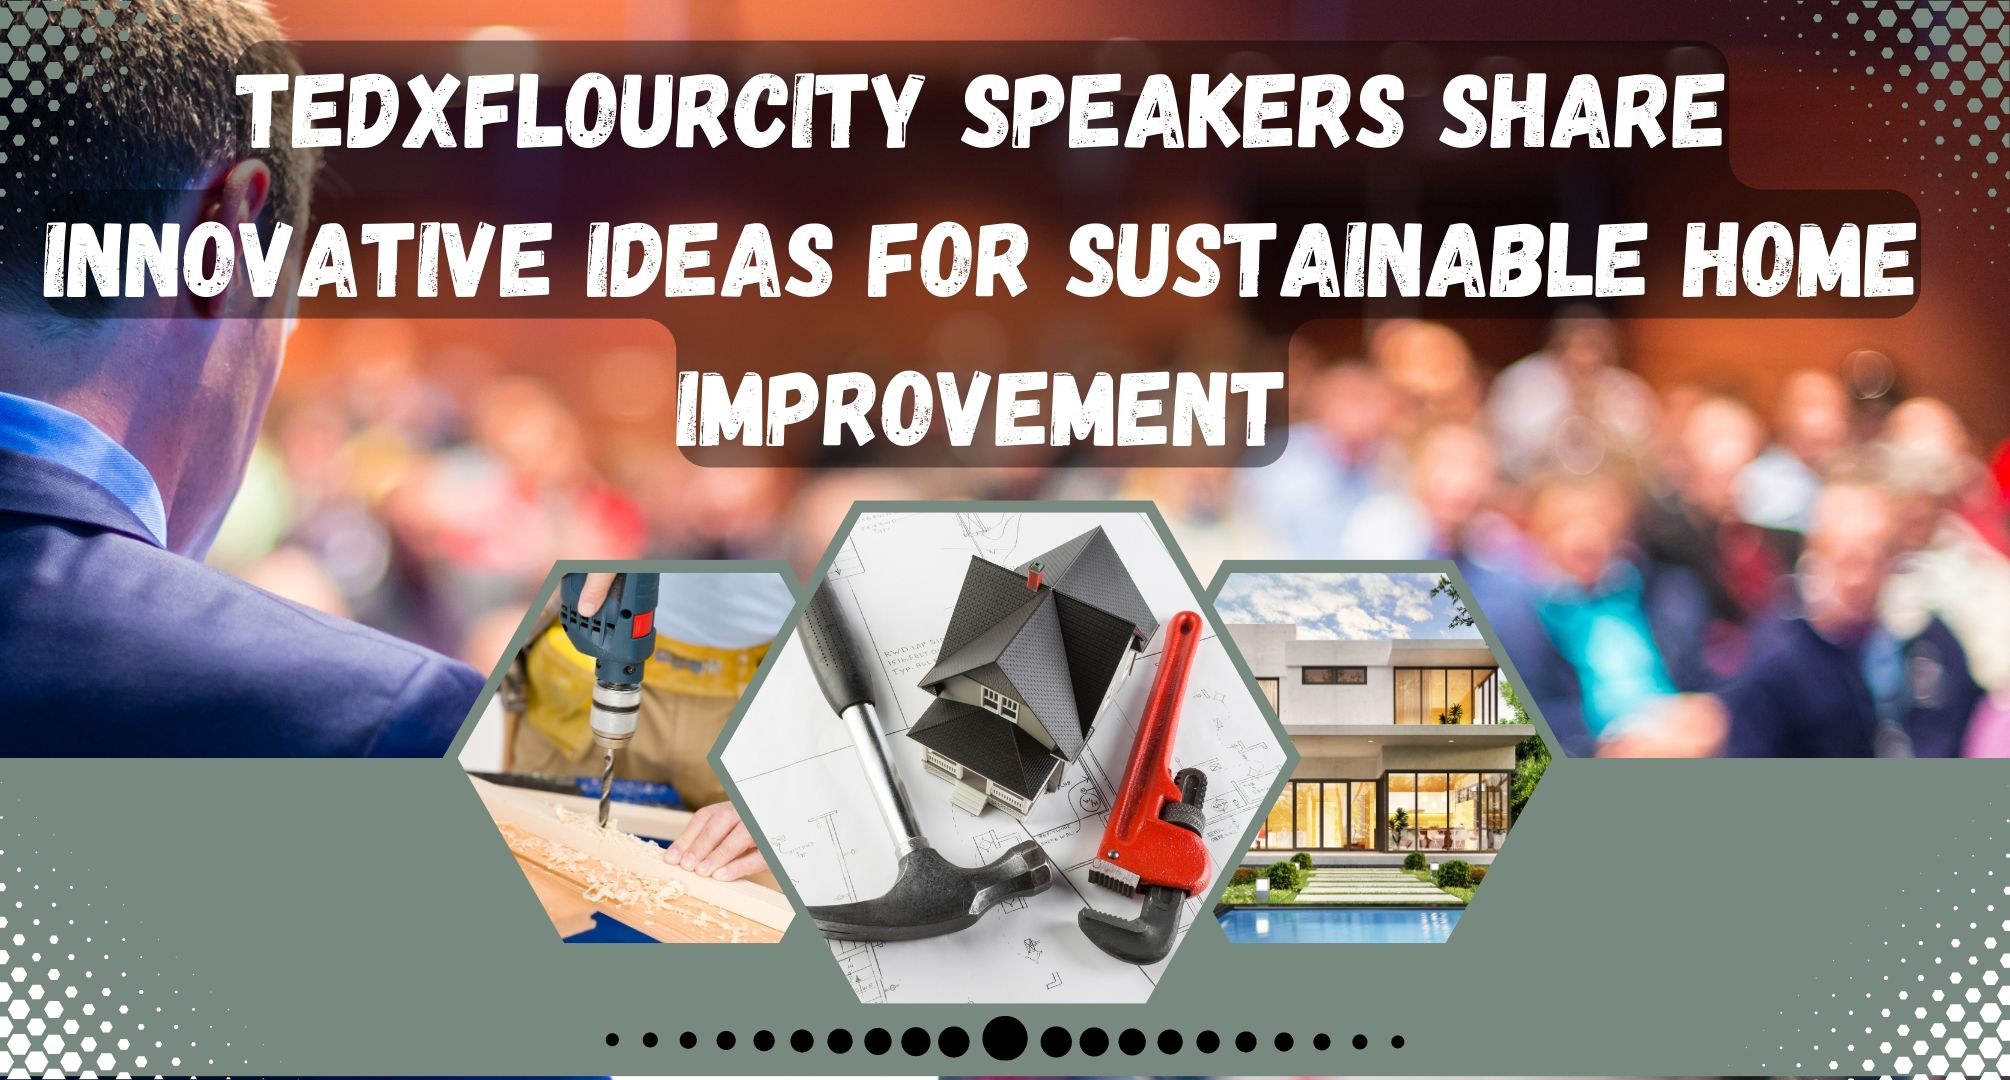 TEDxFlourCity speakers share innovative ideas for sustainable home improvement